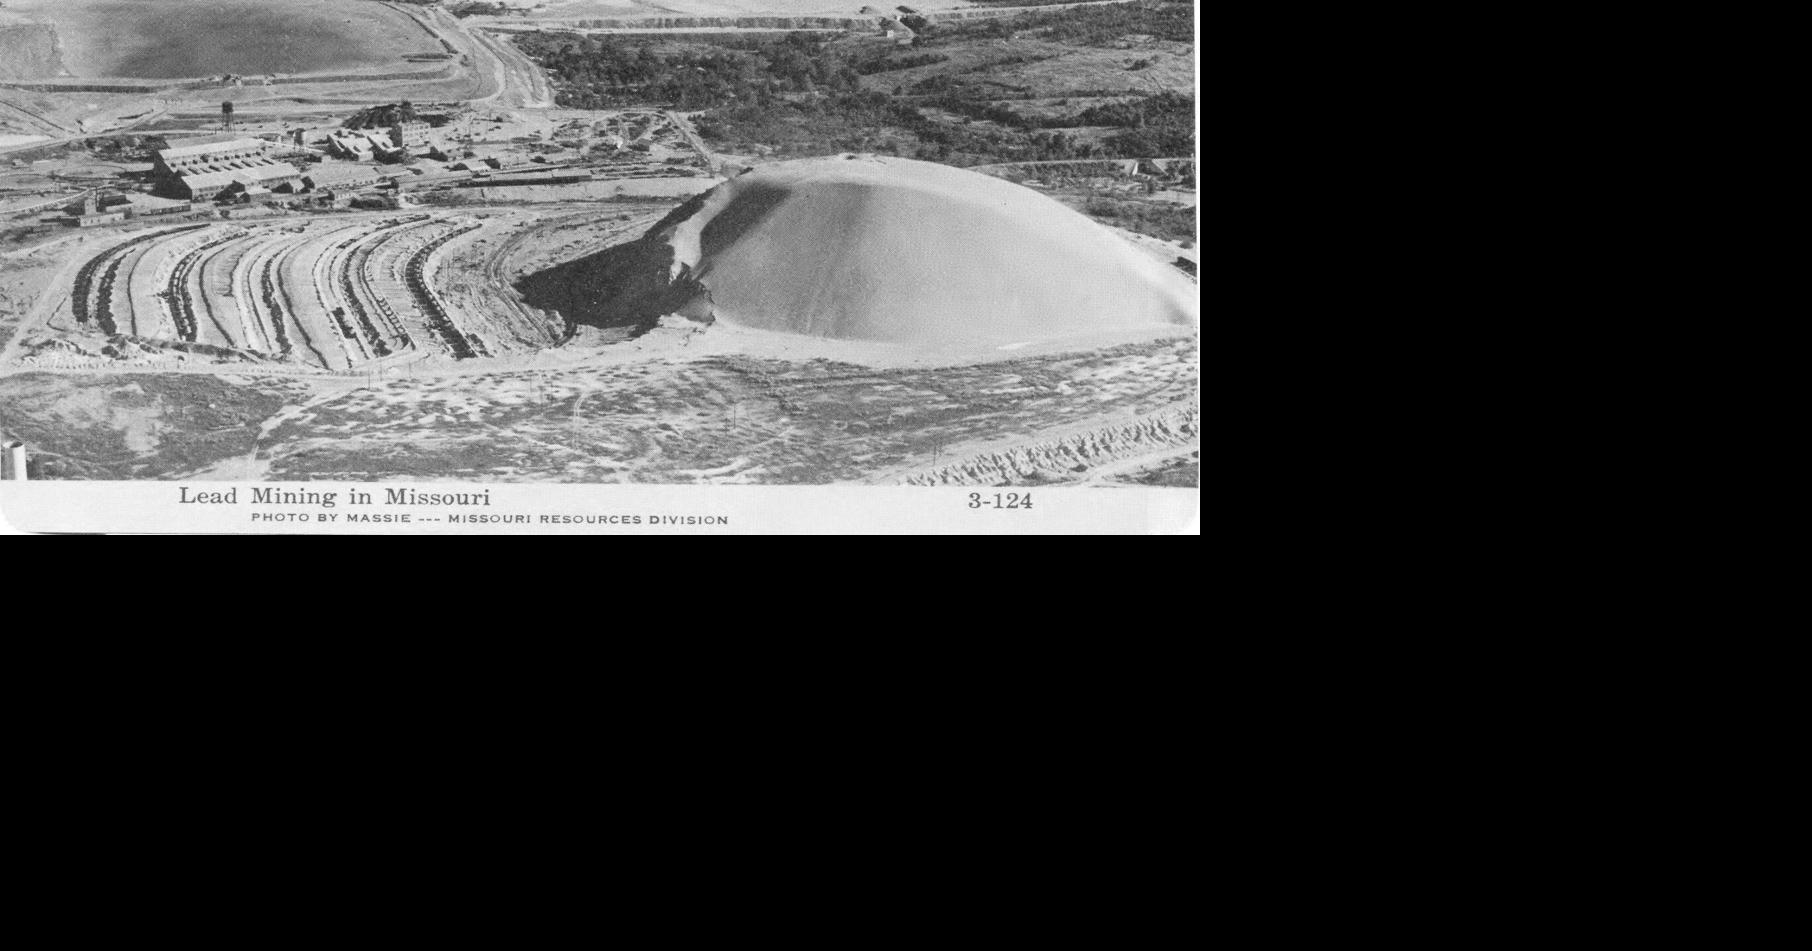 Bill Caldwell: The Oronogo Circle, the greatest zinc producer in the ...